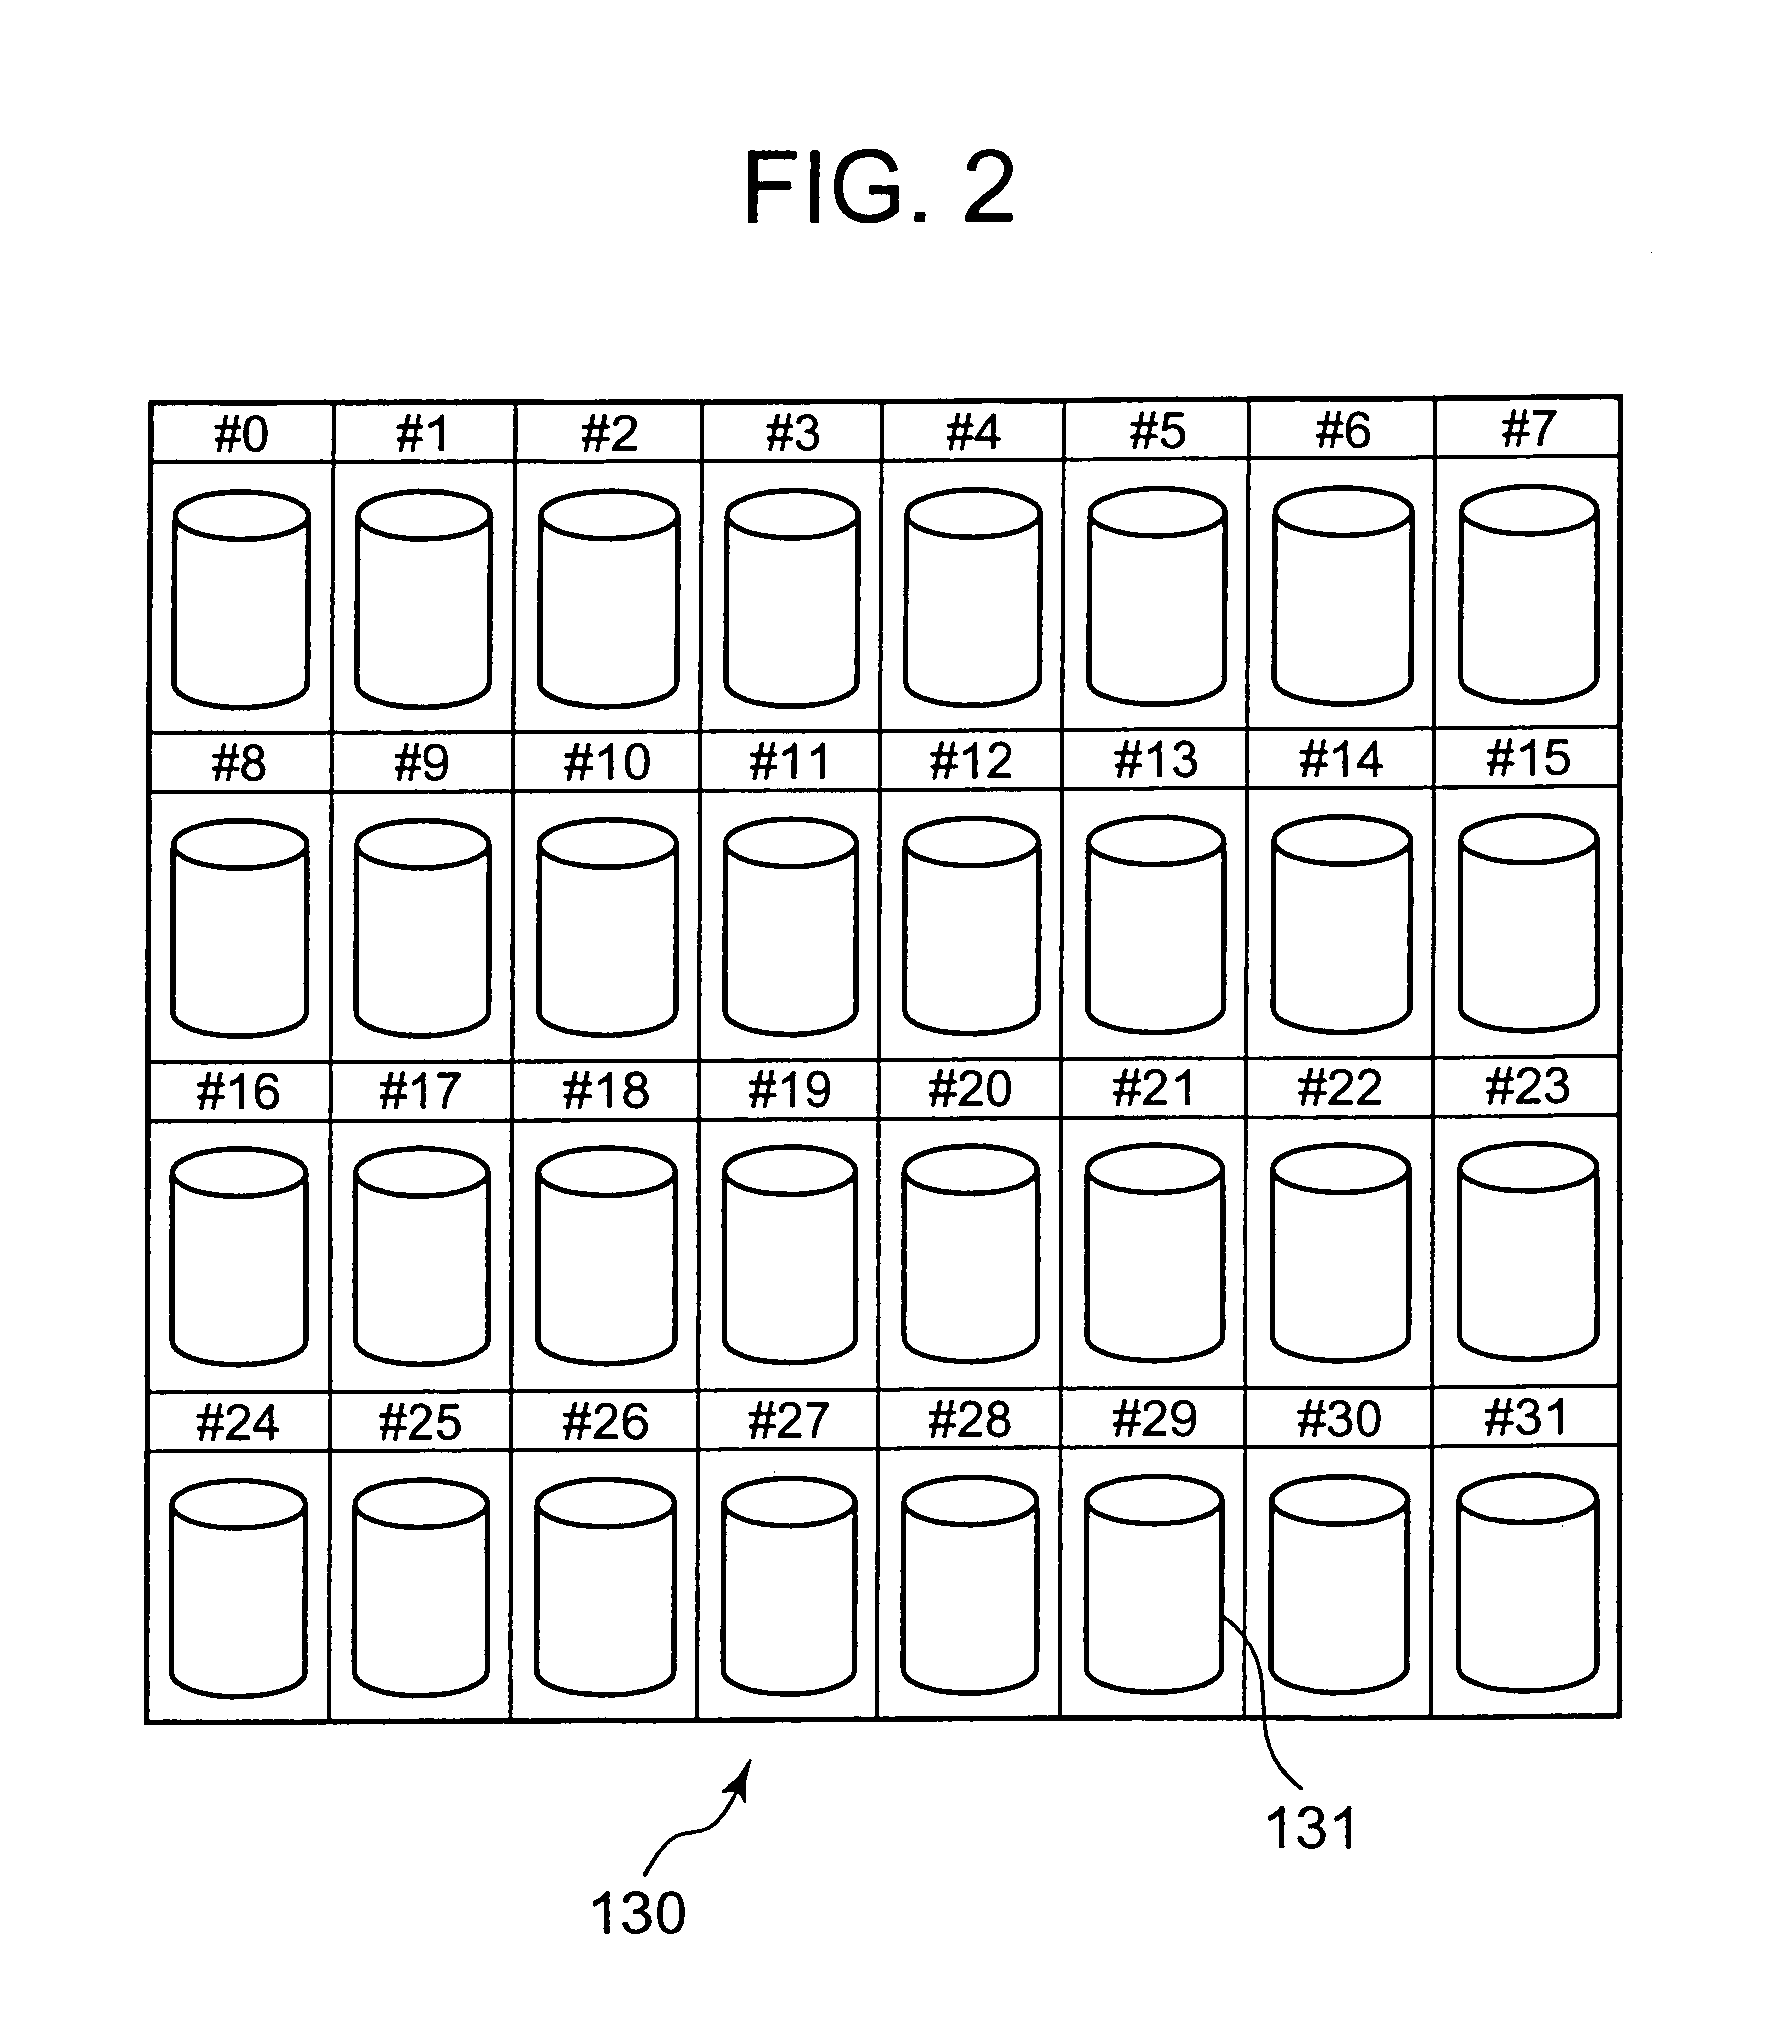 Storage system for suppressing failures of storage media group